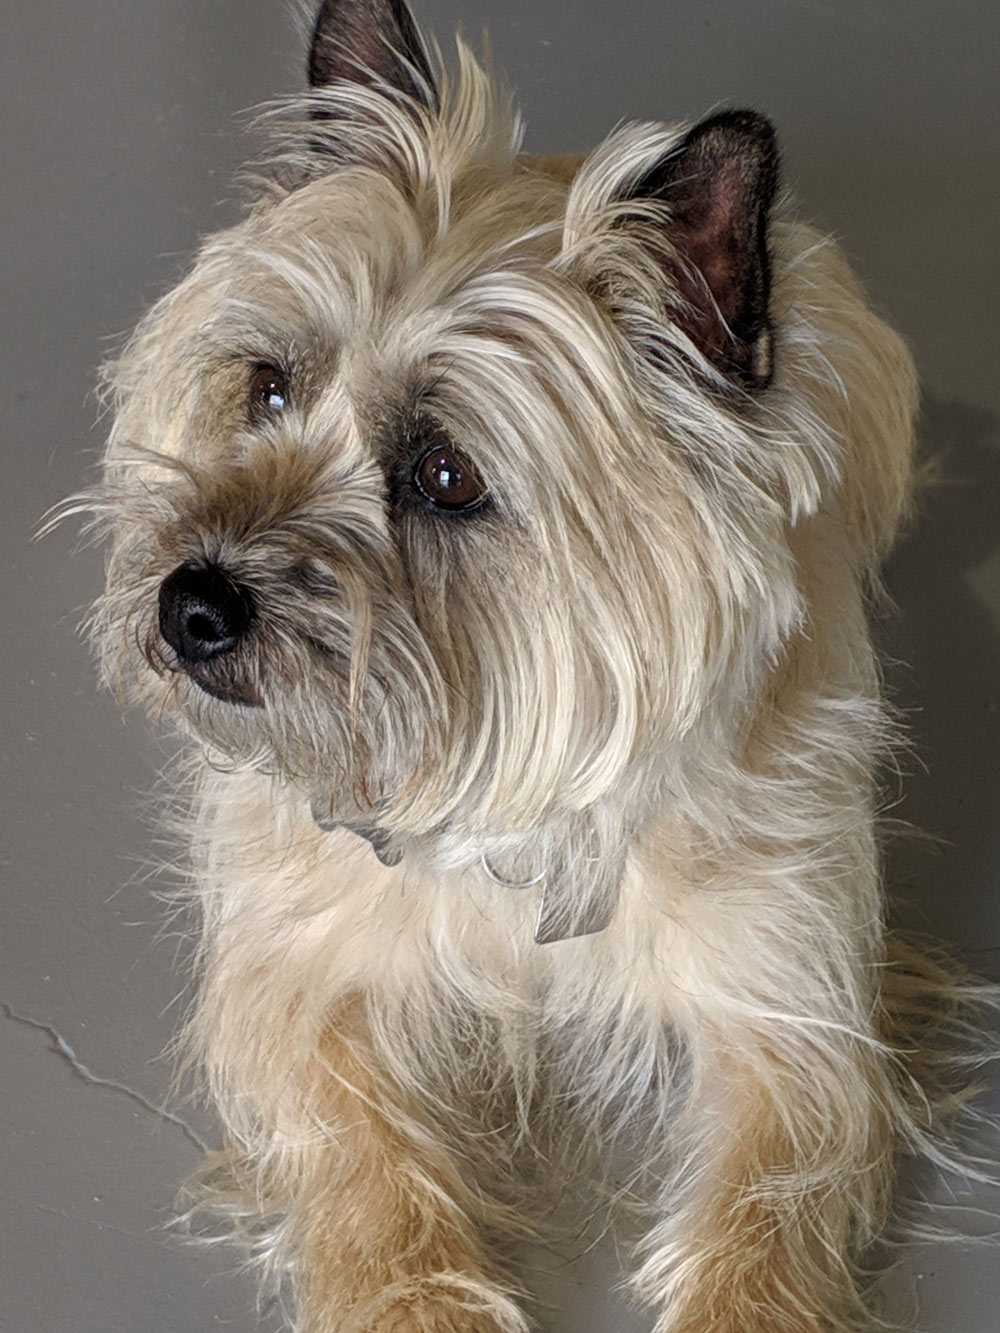 Meet Skyler. She’s a five-year-old Cairn Terrier that Jack and Diane adopted a year and a half ago. She is smart and loves training; they adore her!